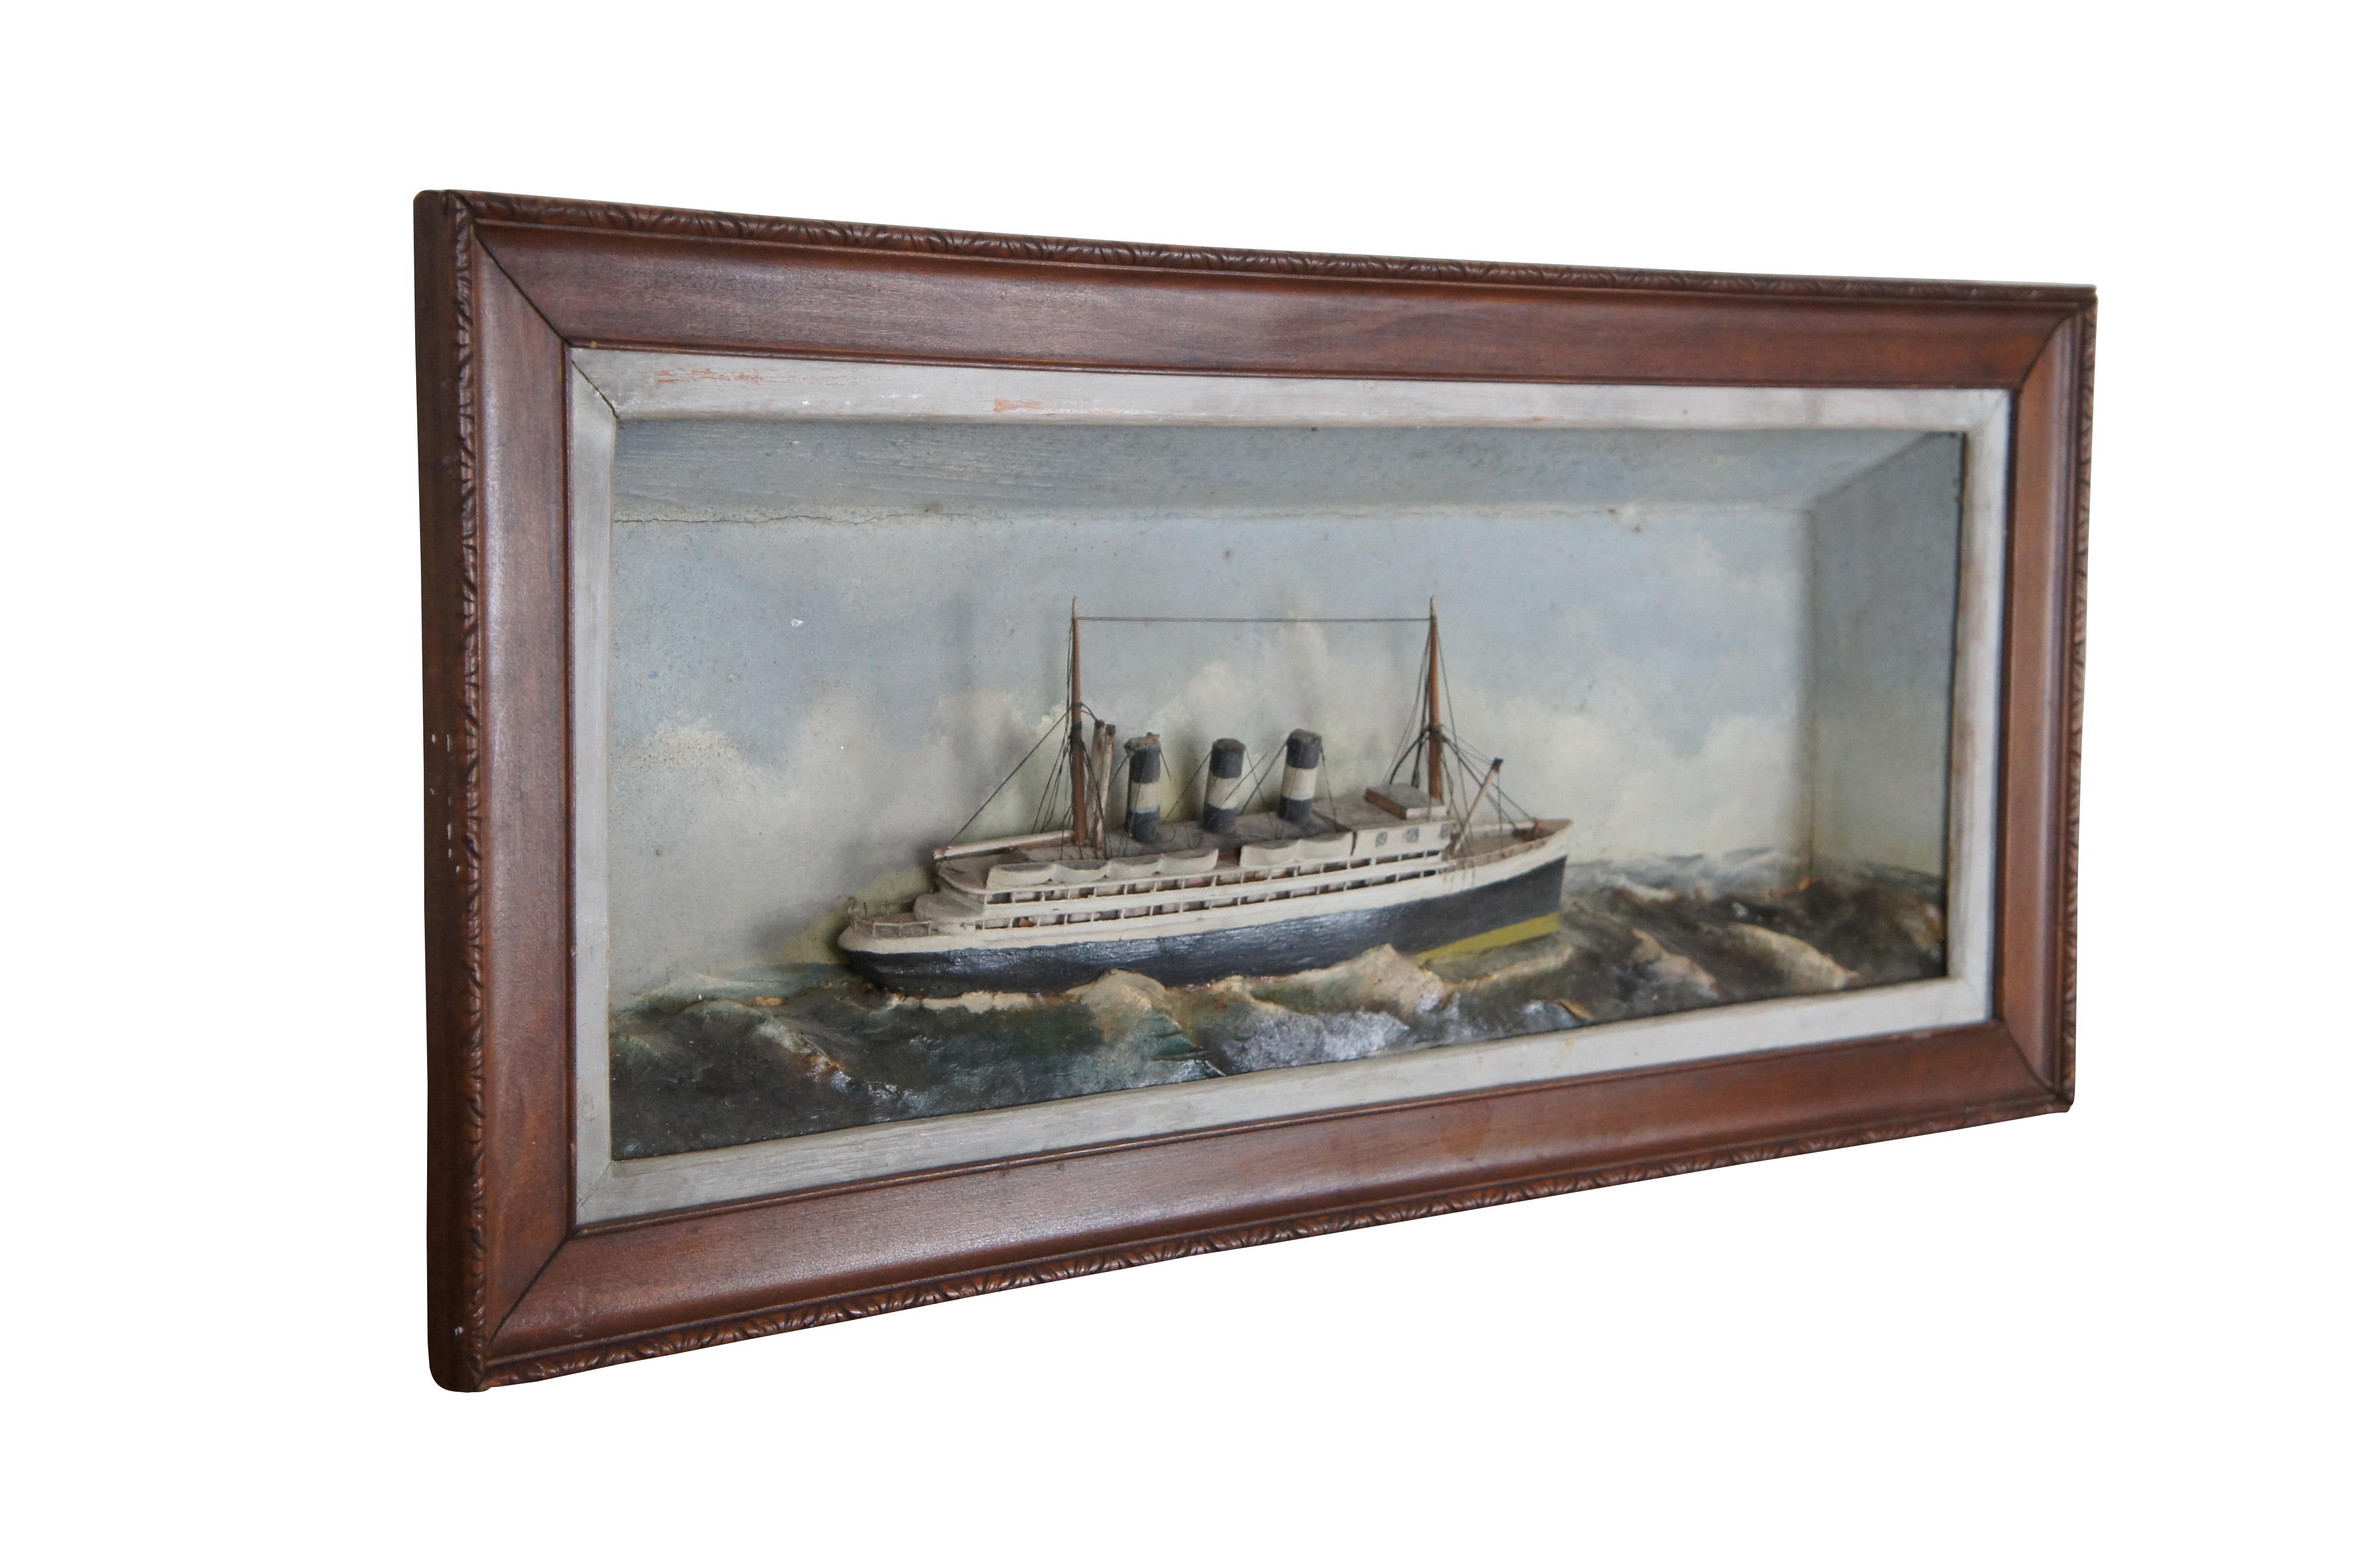 Antique three dimensional folk art diorama portraying a steam boat /  oceanliner / ship on a choppy sea. The model is set in a rectangular shadowbox with white trim and brown wood frame with carved border.

Dimensions:
26.5